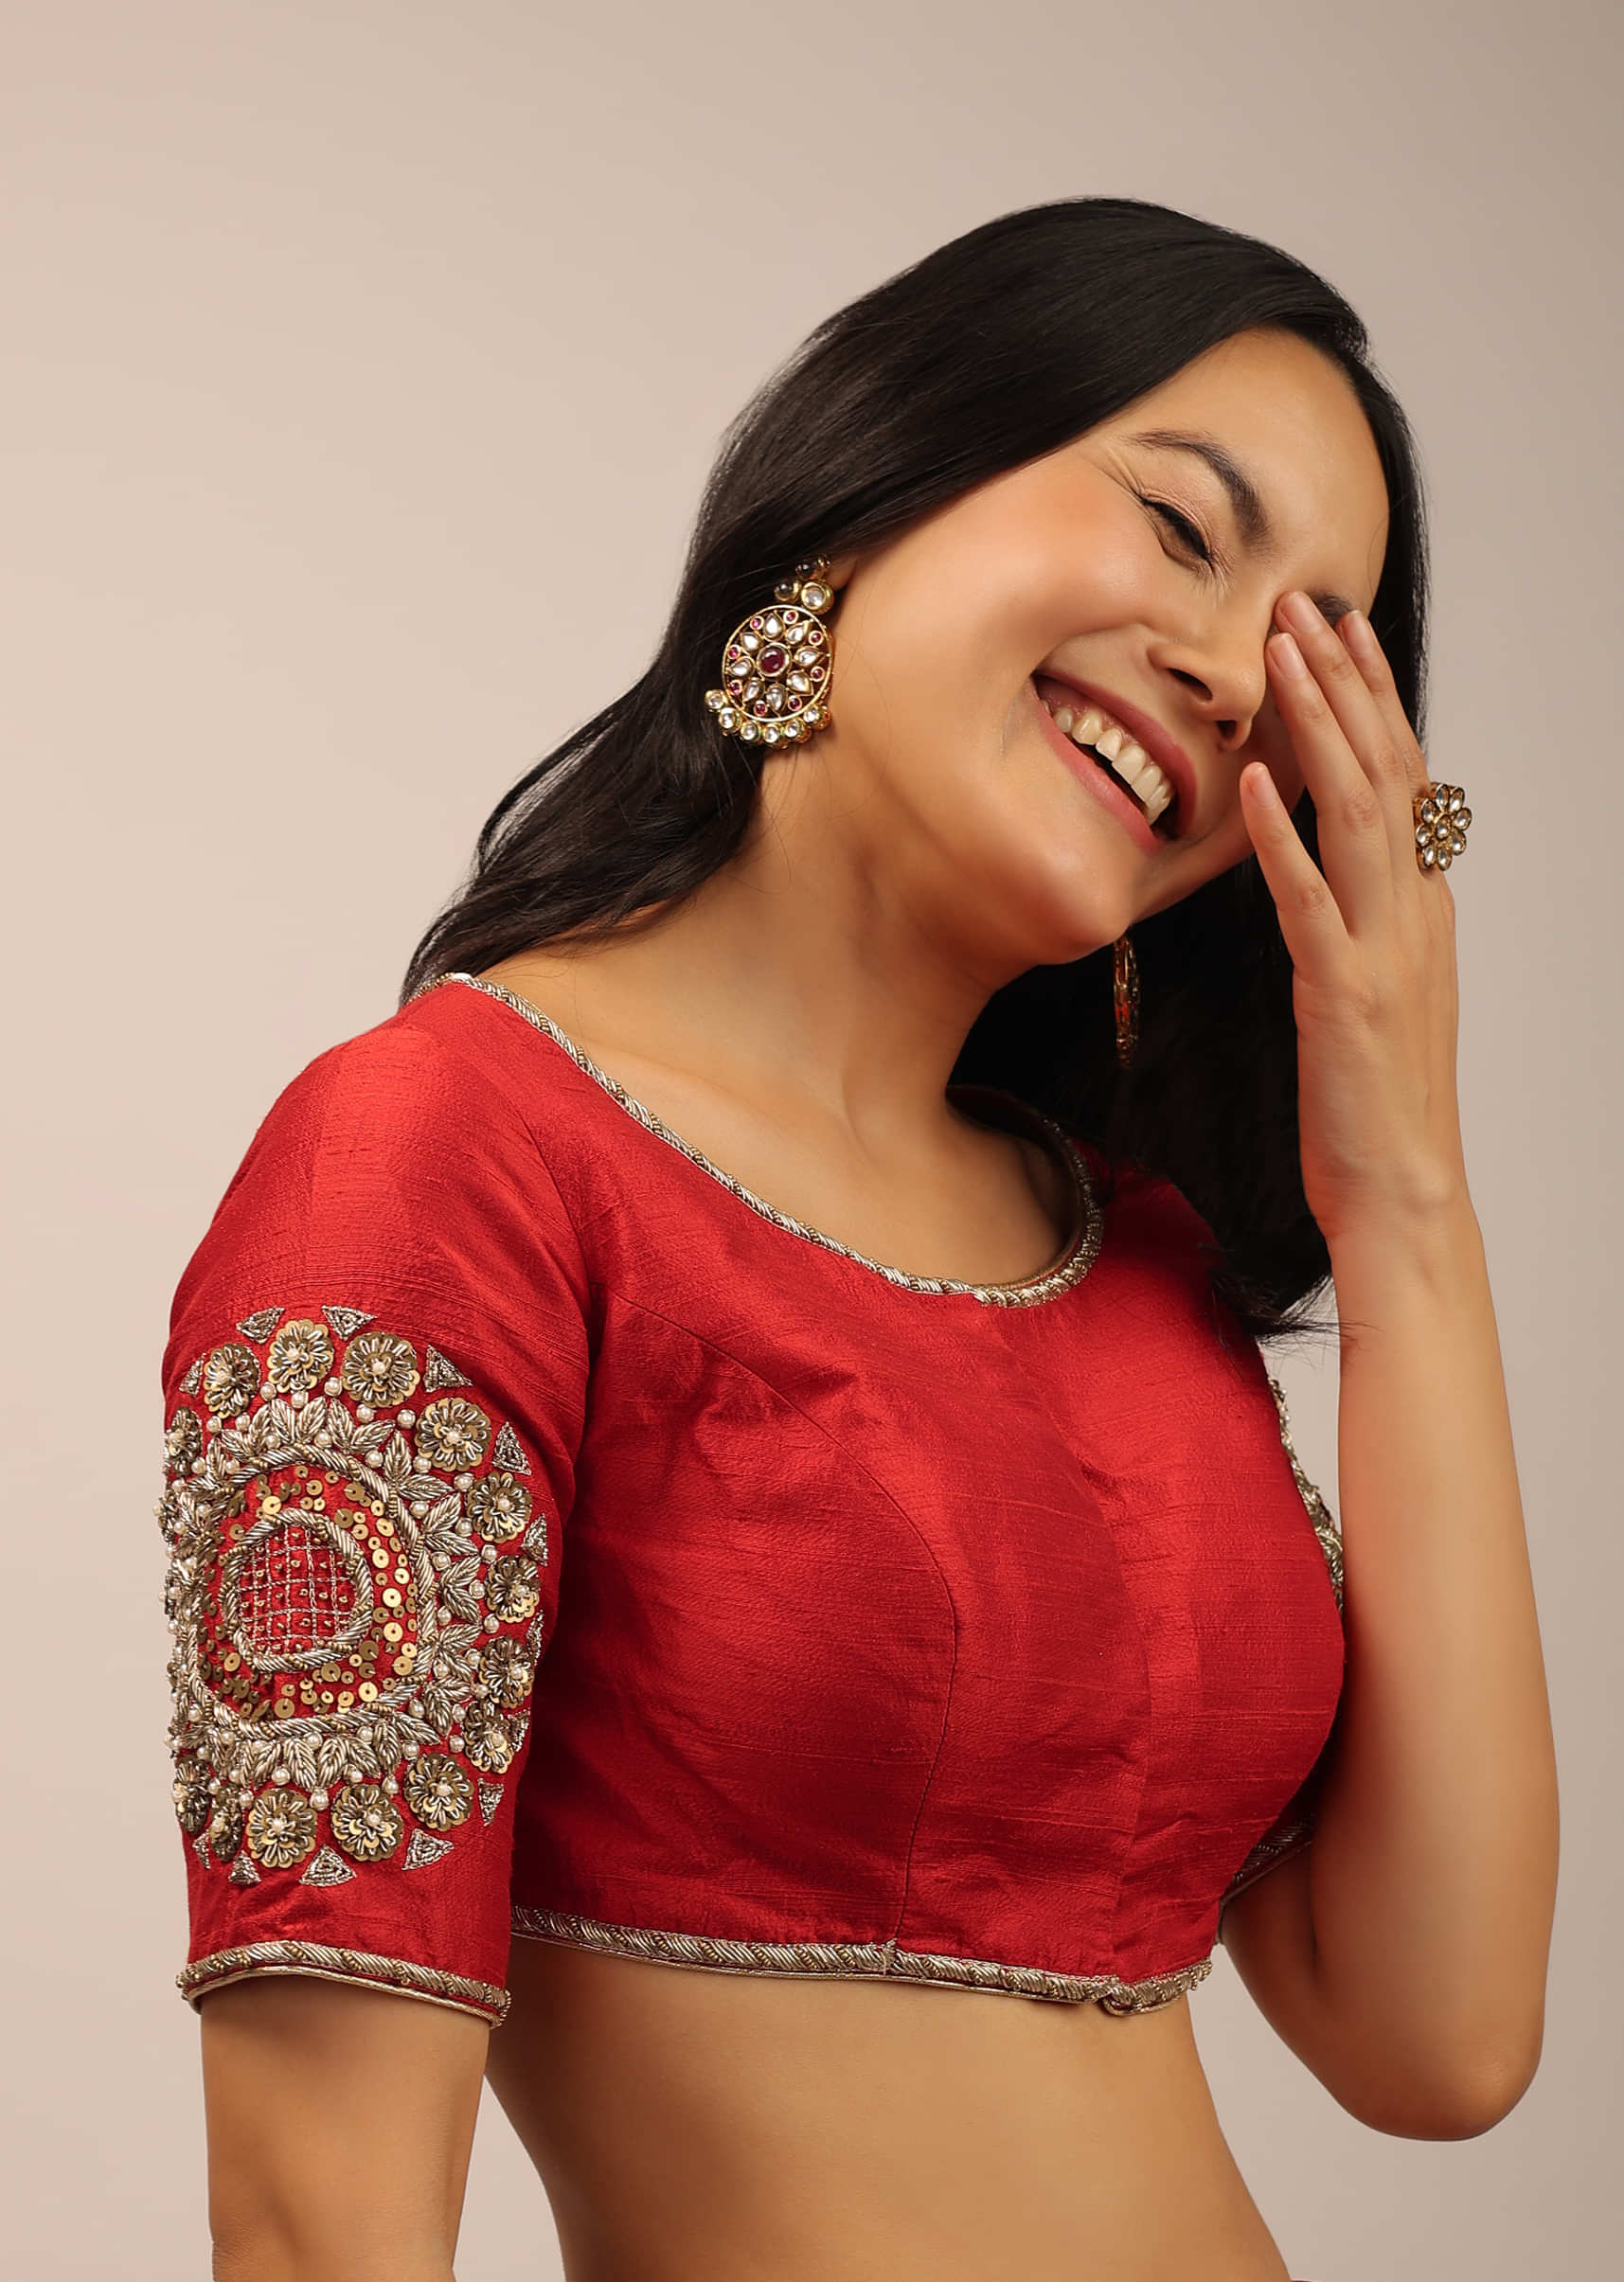 Red Blouse In Raw Silk With Half Sleeves And Zardosi Embroidered Motif On The Sleeves And Back